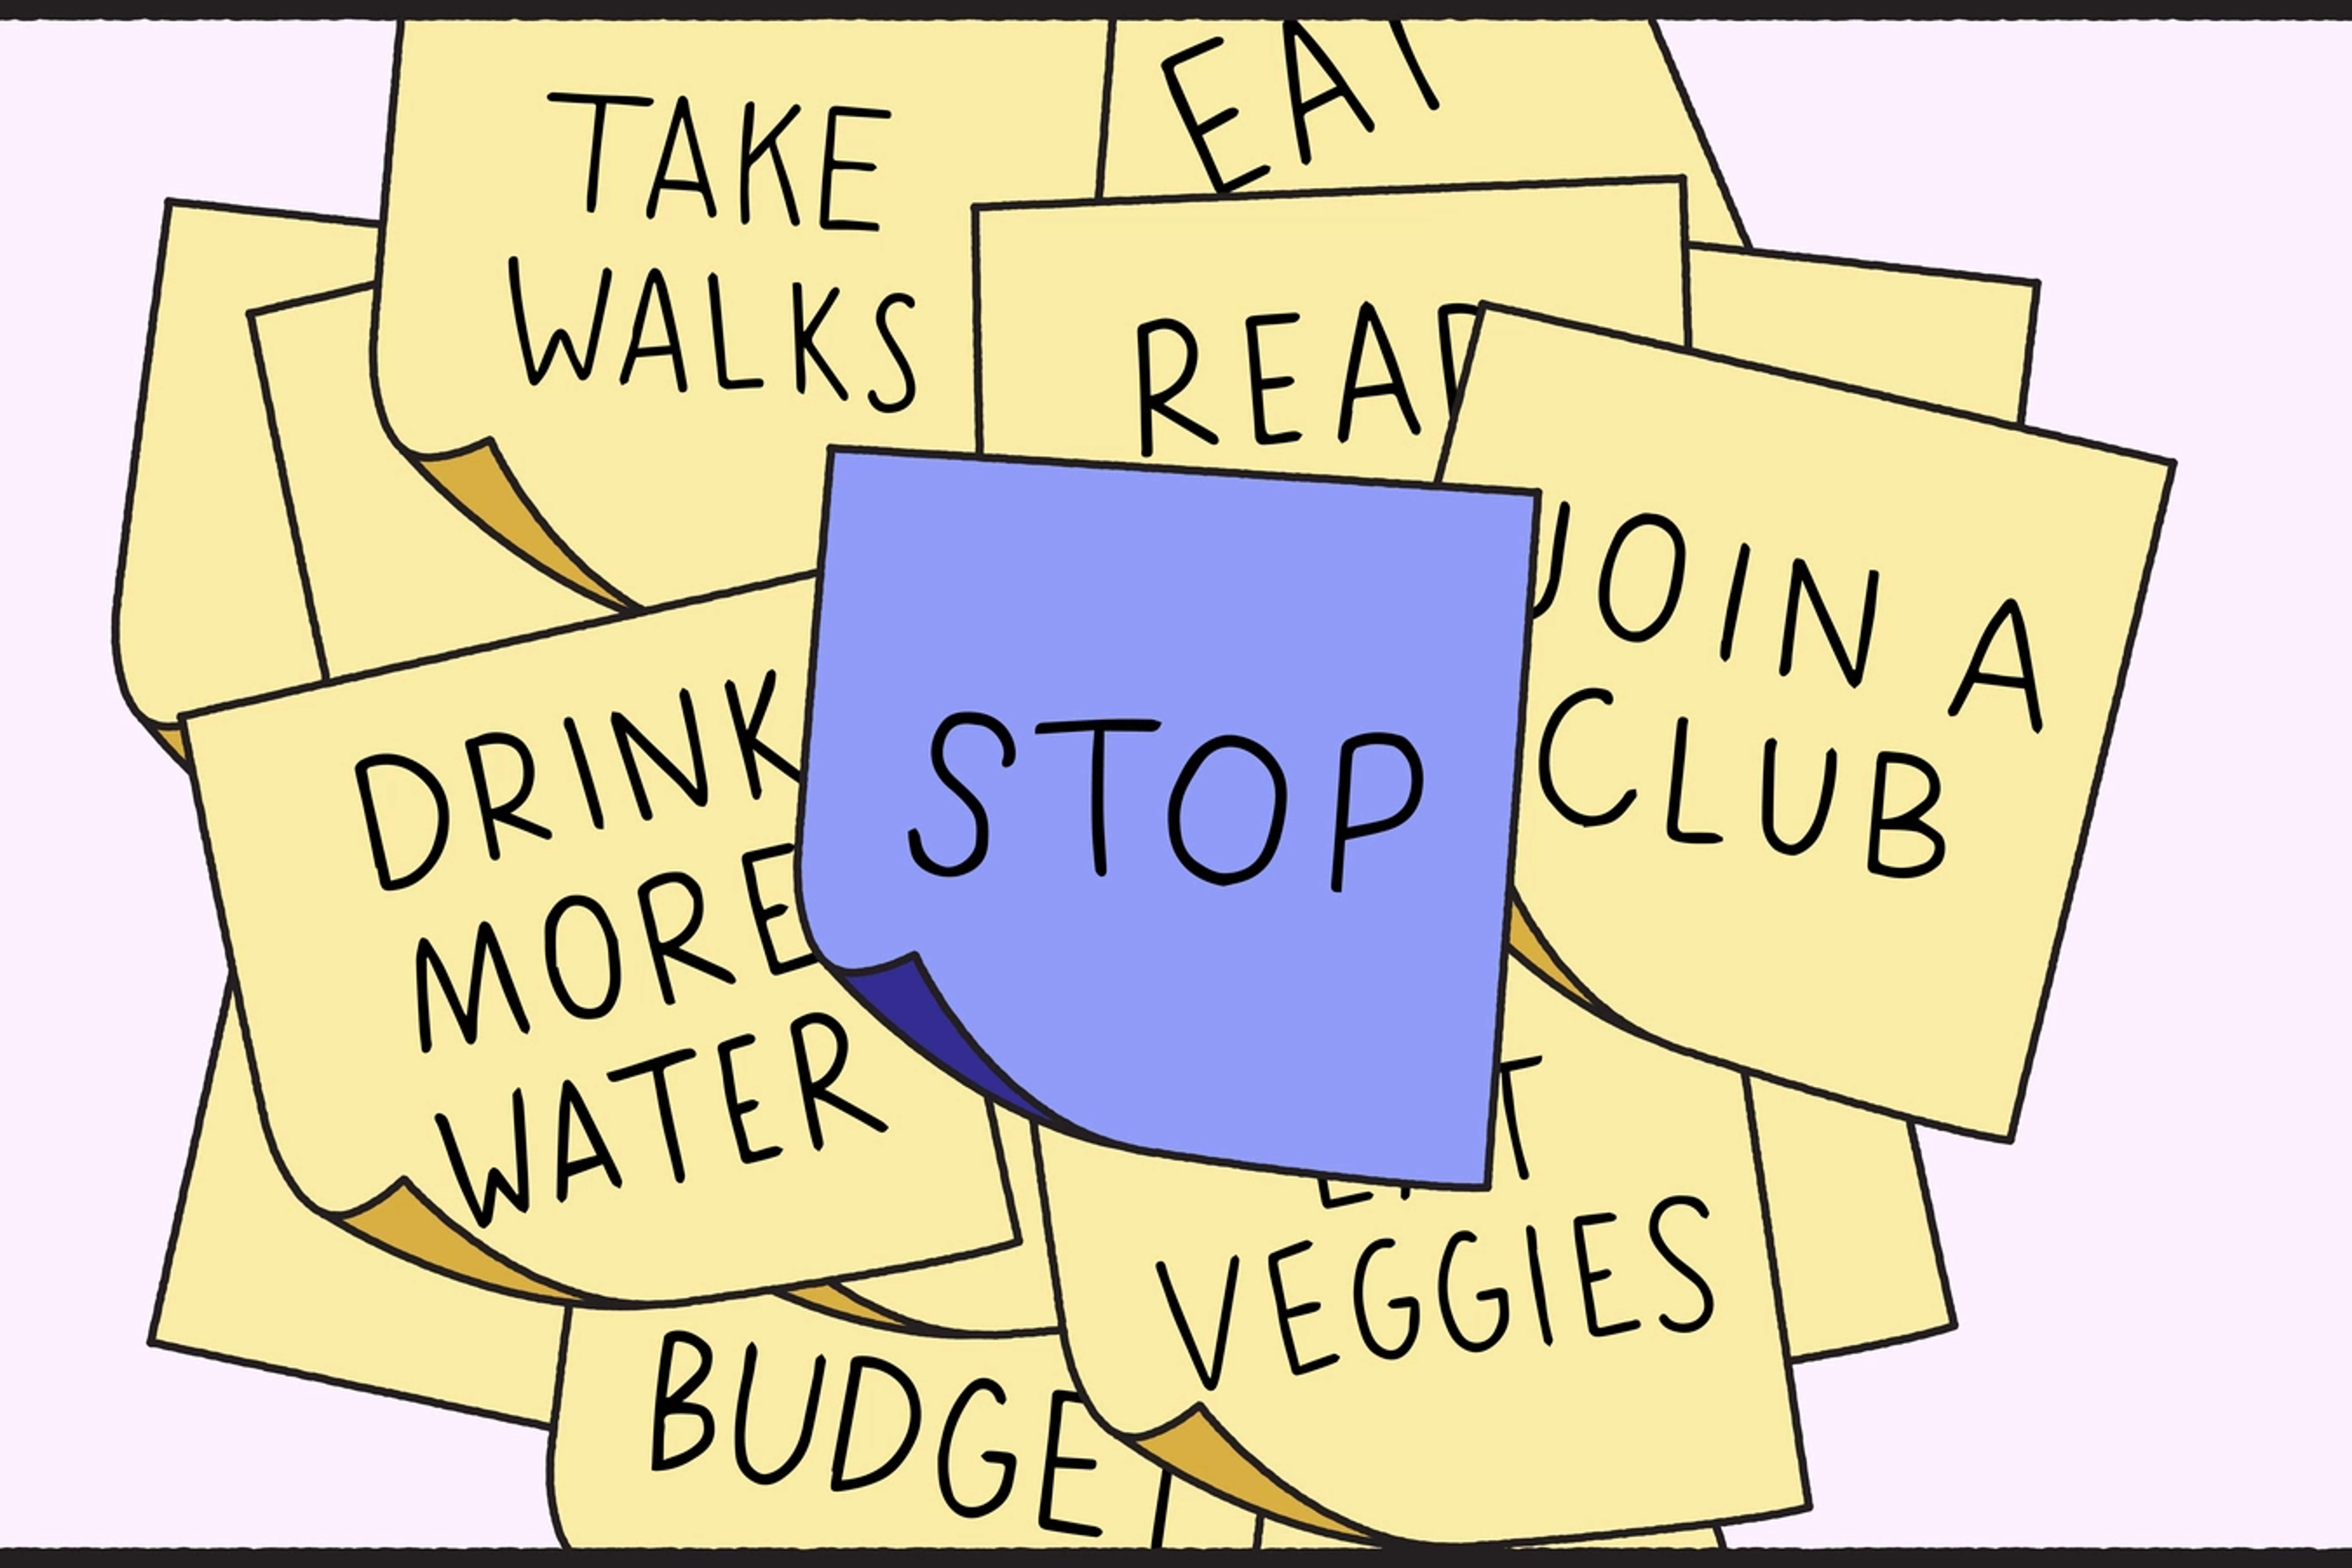 Illustration of New Year's resolutions on post-it notes, like take walks and drink more water, with a purple stop post-it note over the pile.